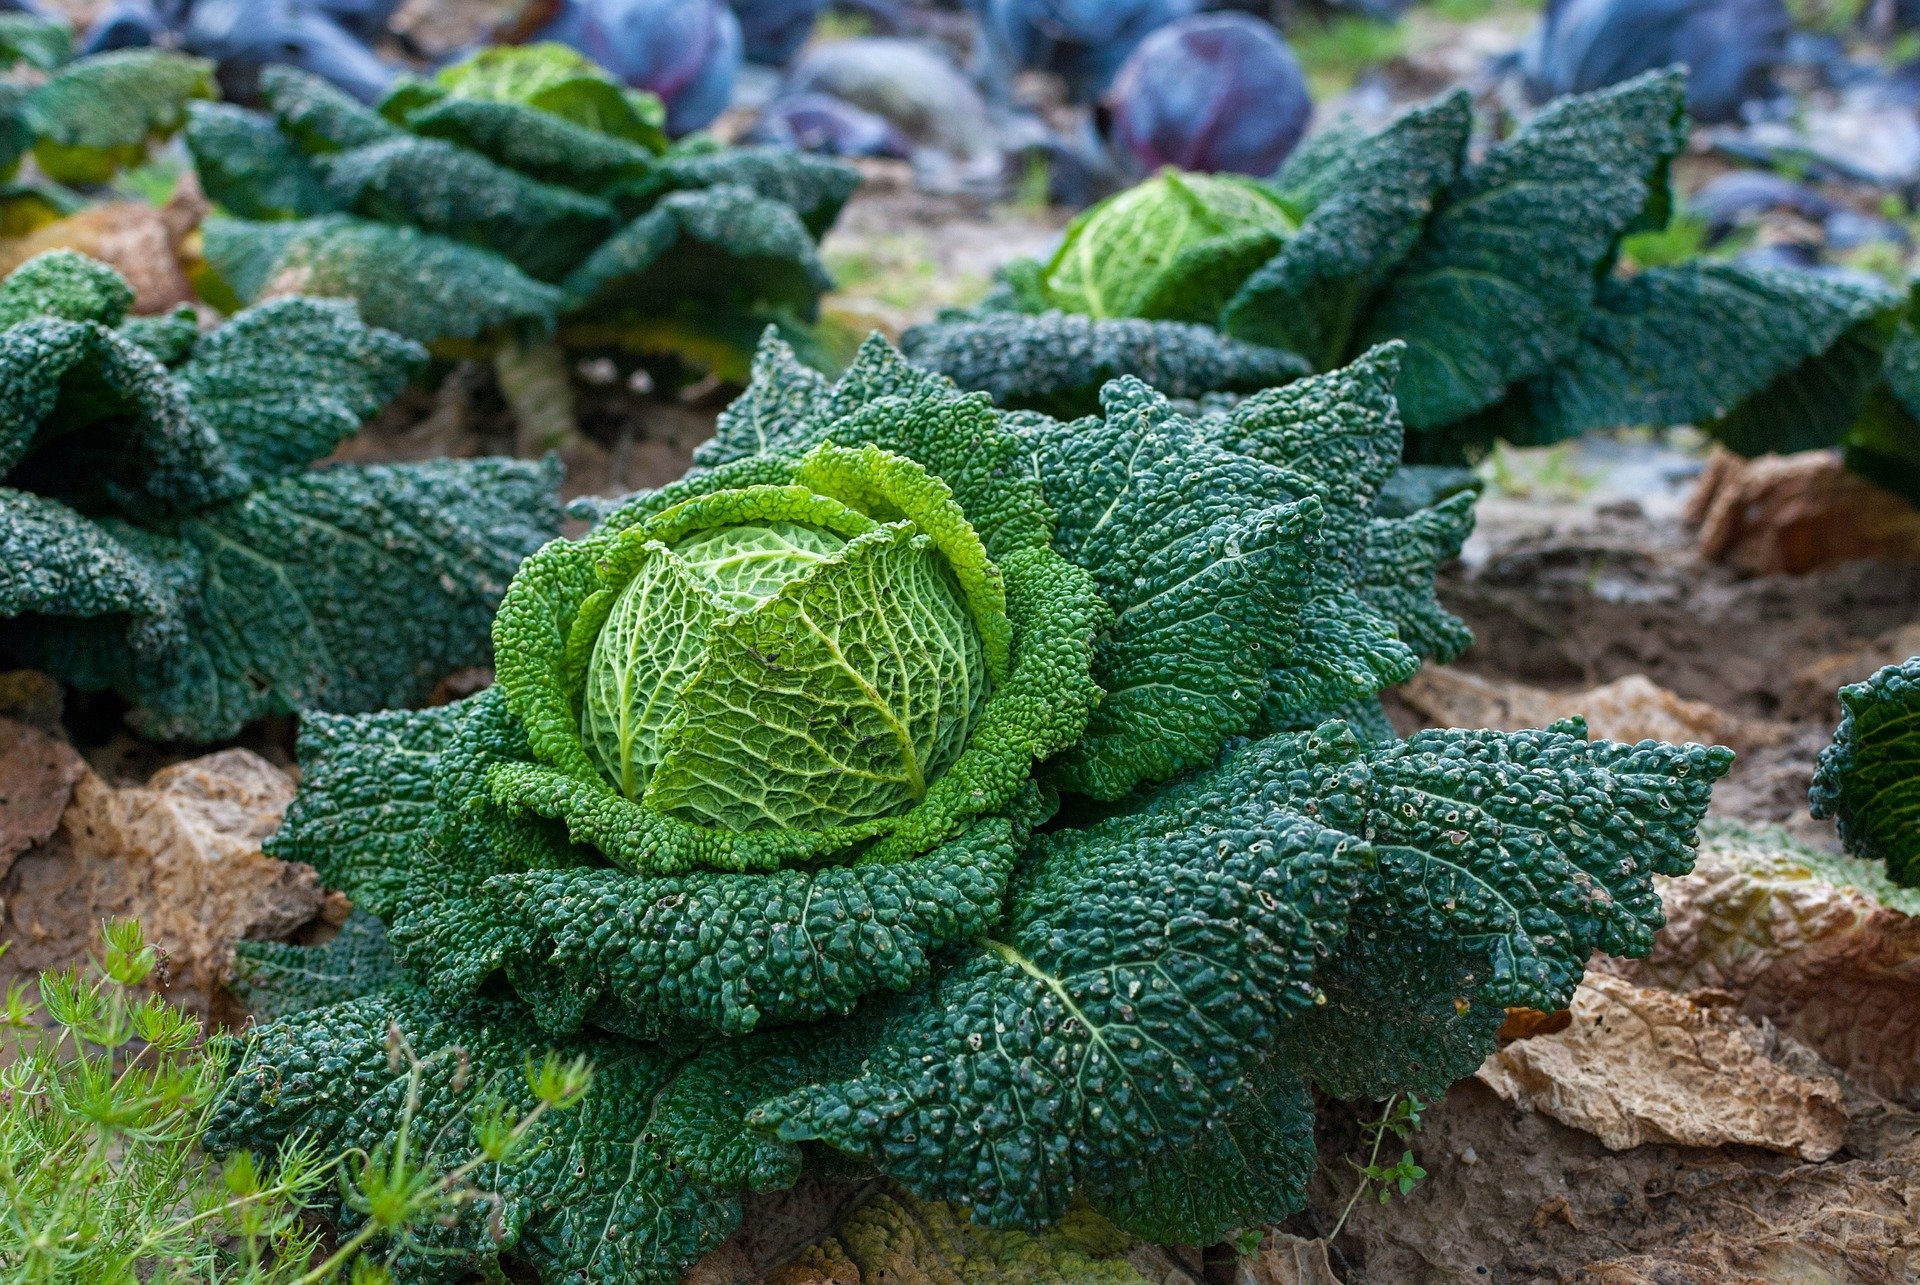 Delicious looking cabbages growing in the soil